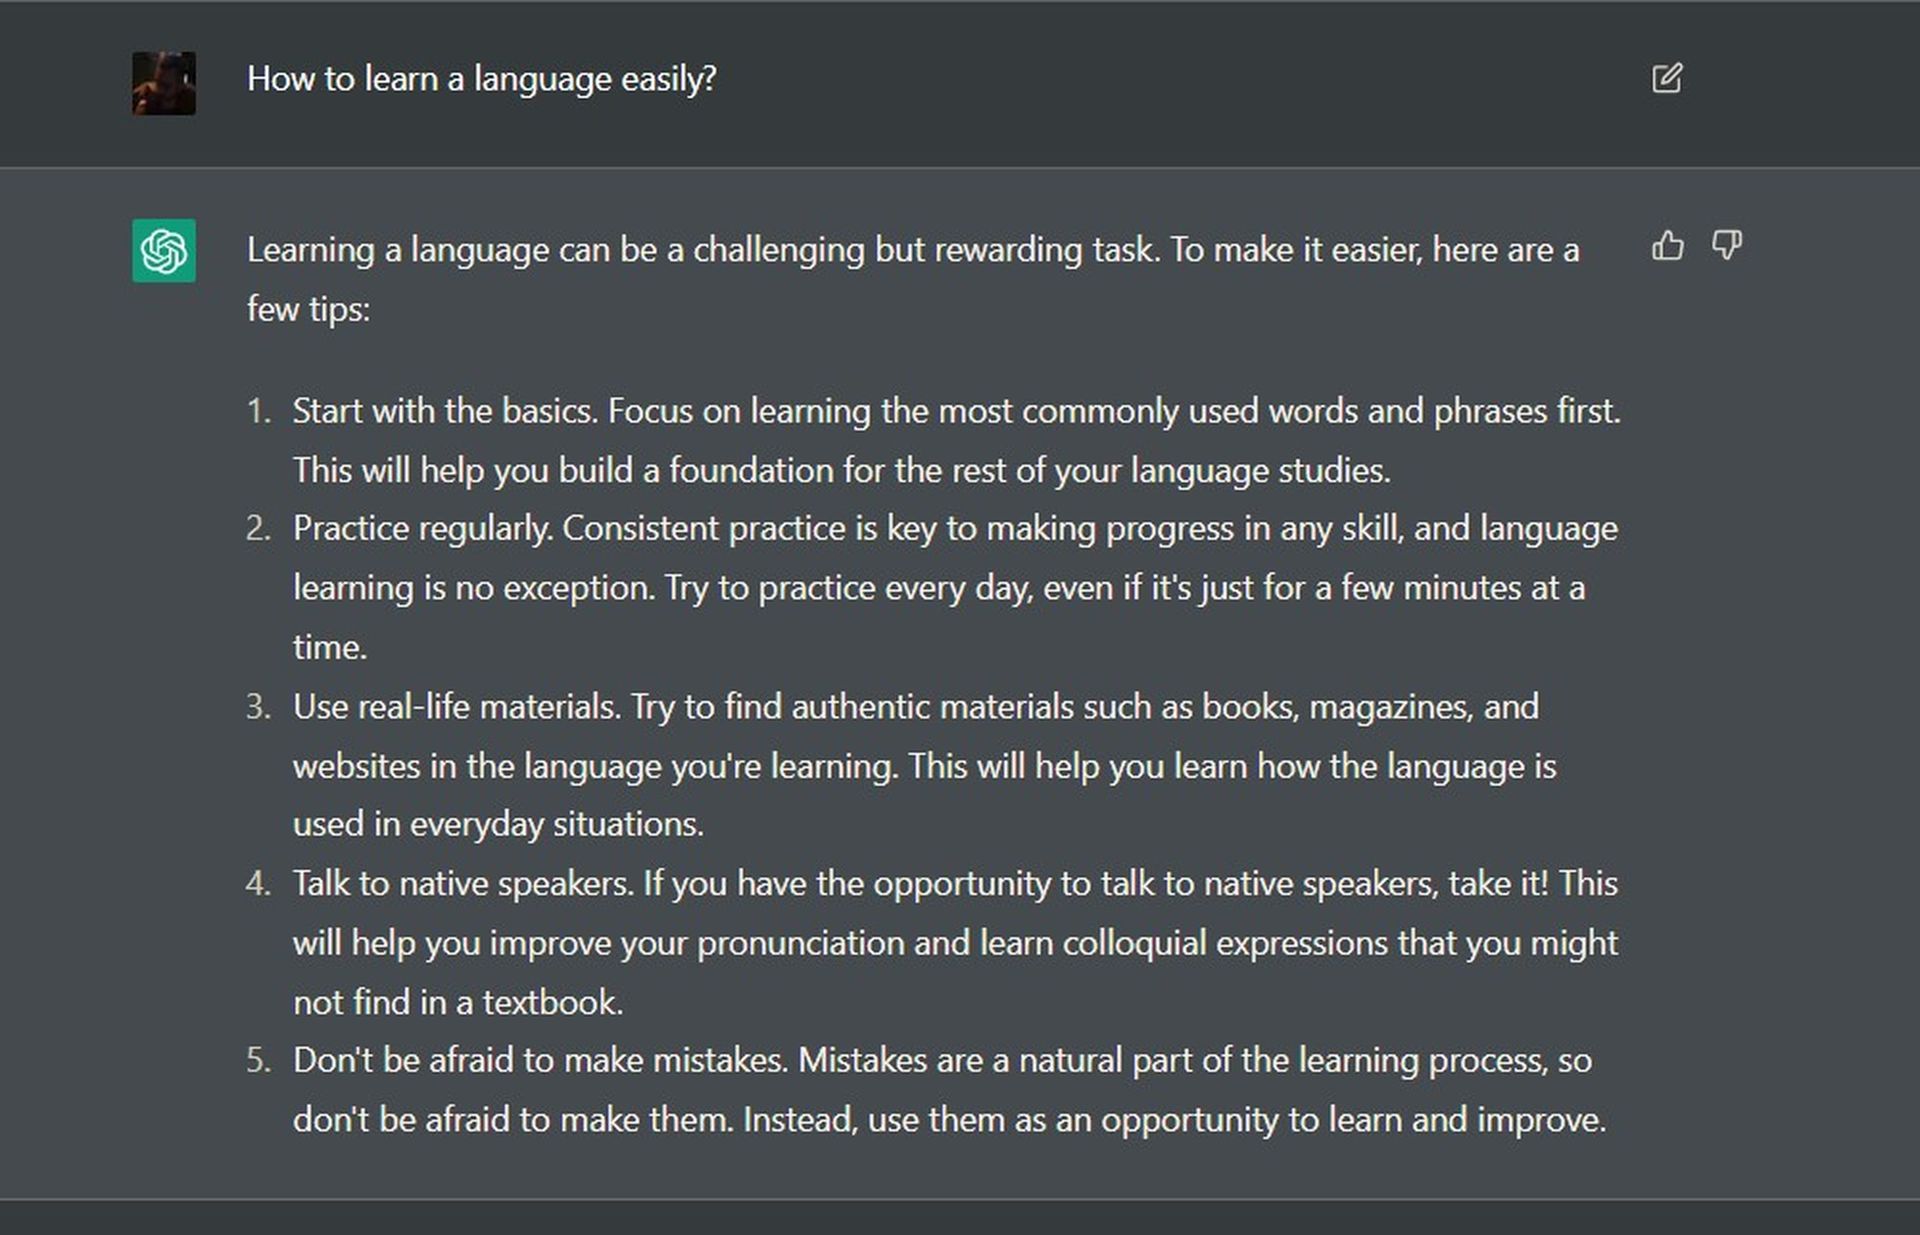 Asking ChatGPT for some tips on learning a new language